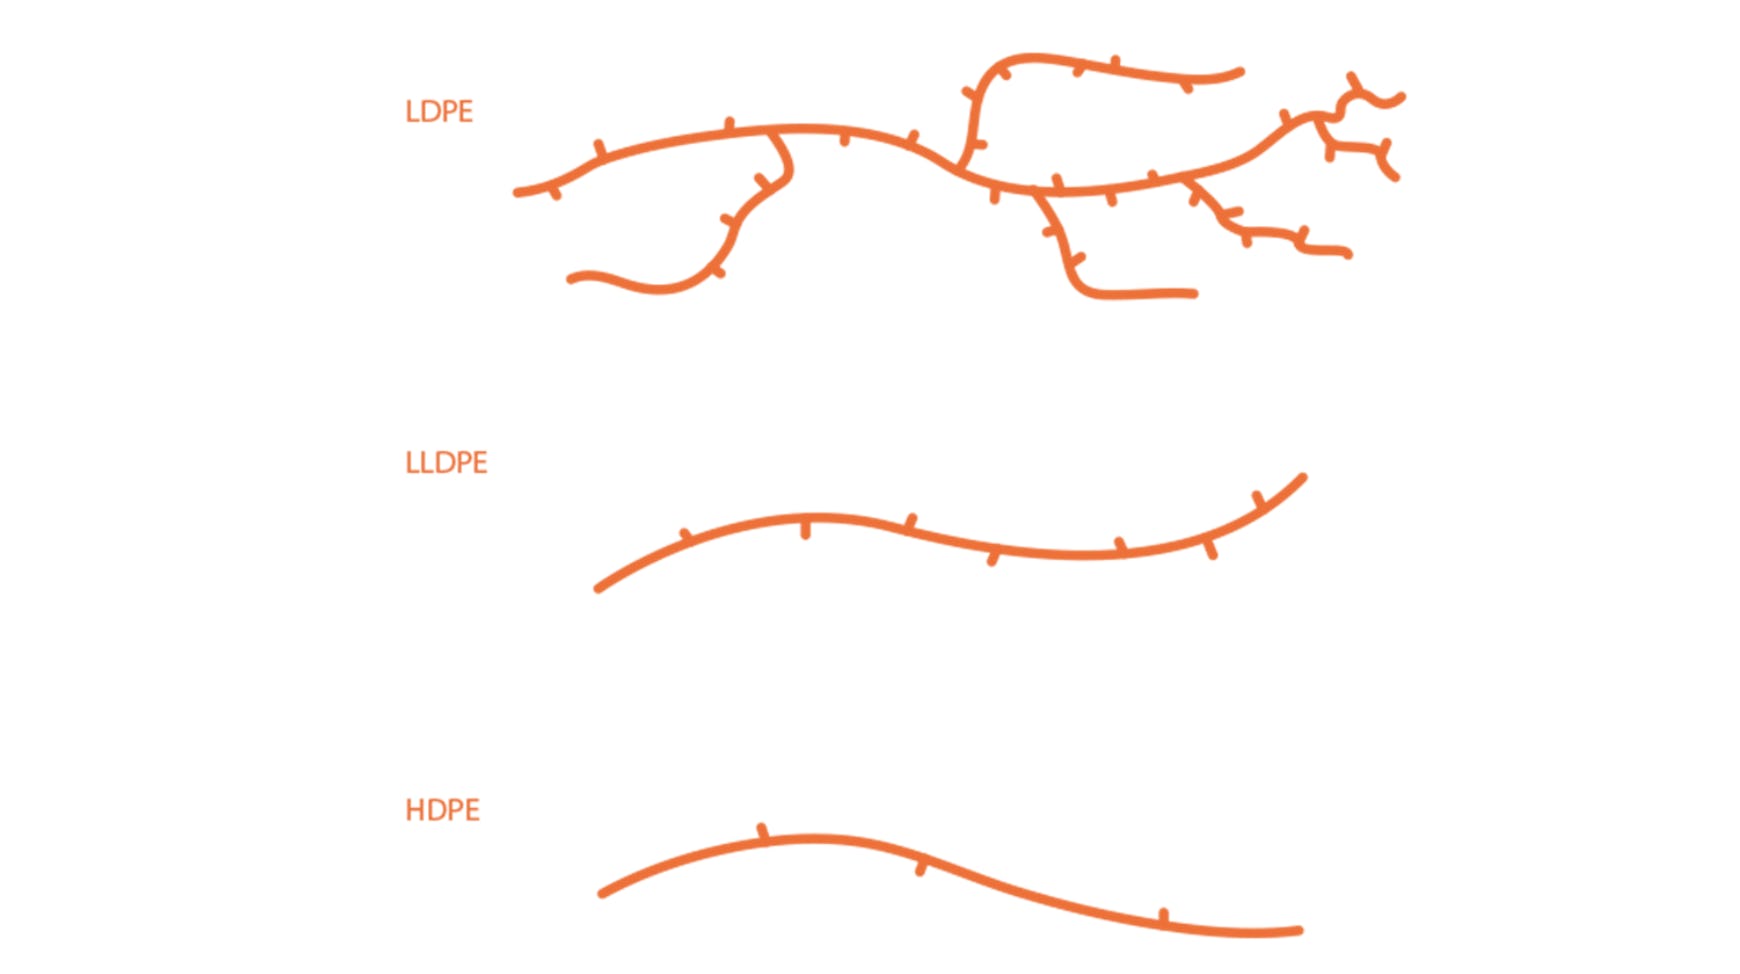 linear structures of LDPE, LLDPE, and HDPE